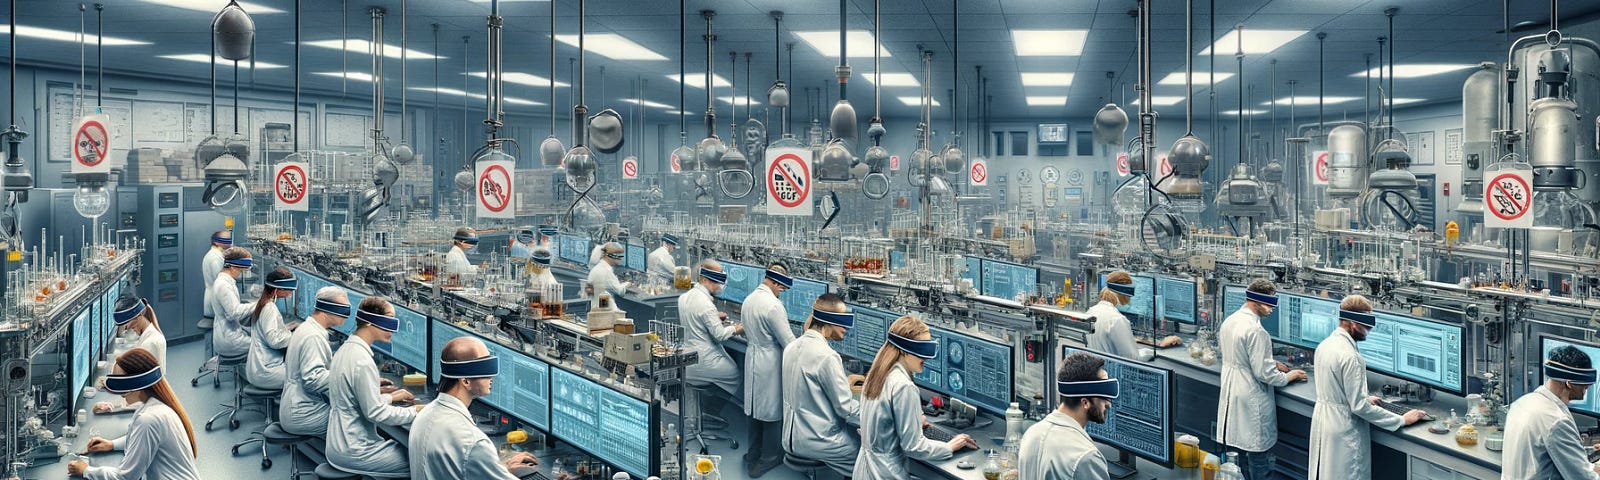 ChatGPT & DALL-E generated panoramic image depicting researchers with blinders on, ignoring obvious warning signs in a laboratory setting.